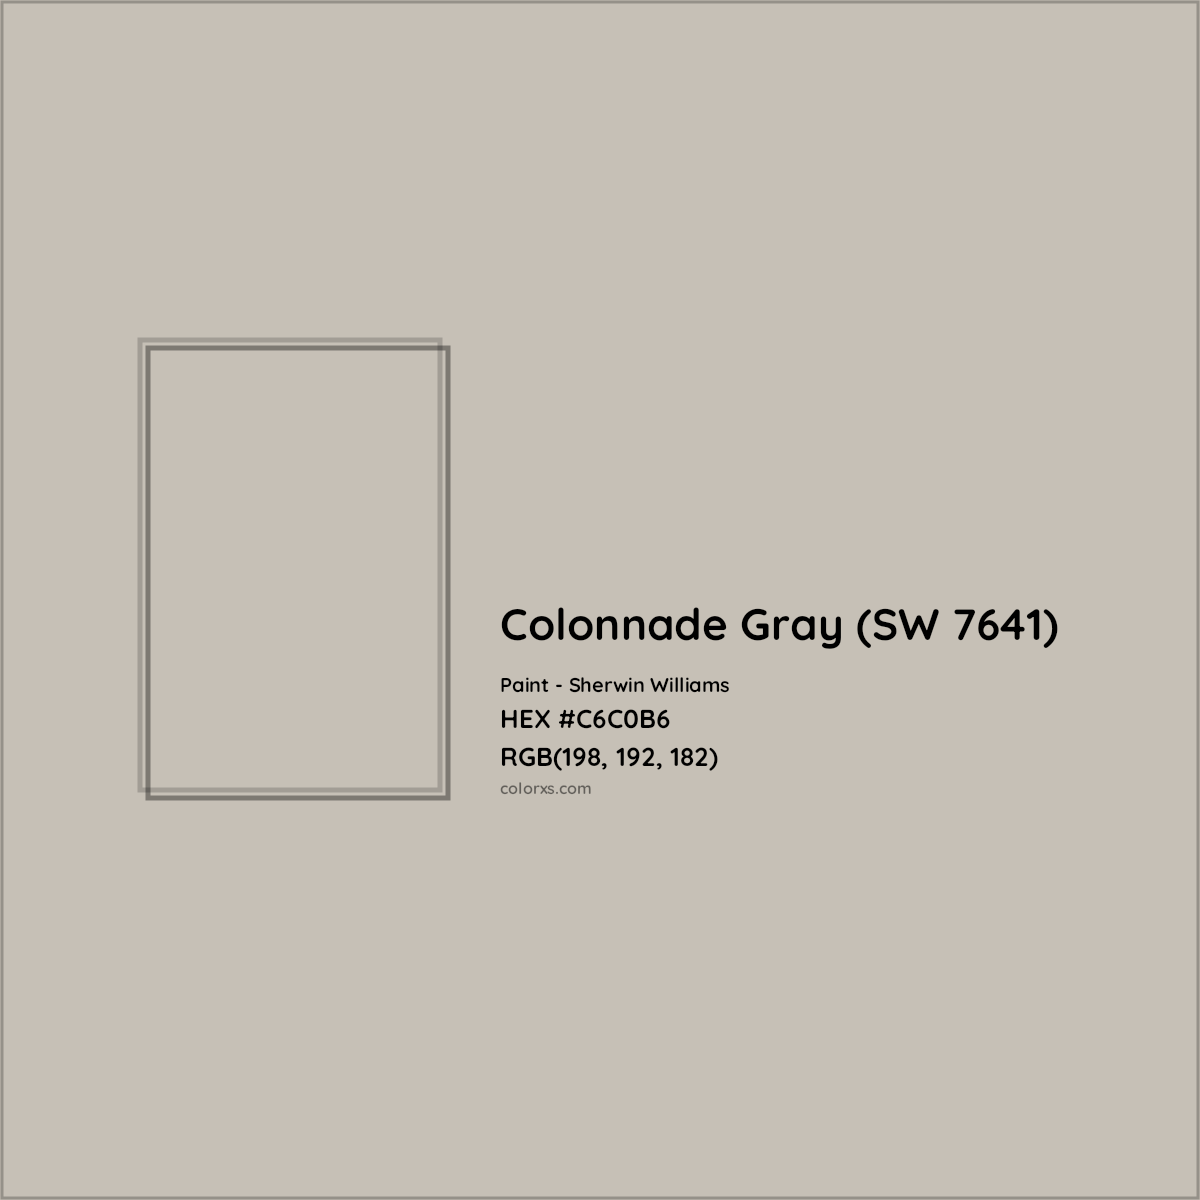 HEX #C6C0B6 Colonnade Gray (SW 7641) Paint Sherwin Williams - Color Code